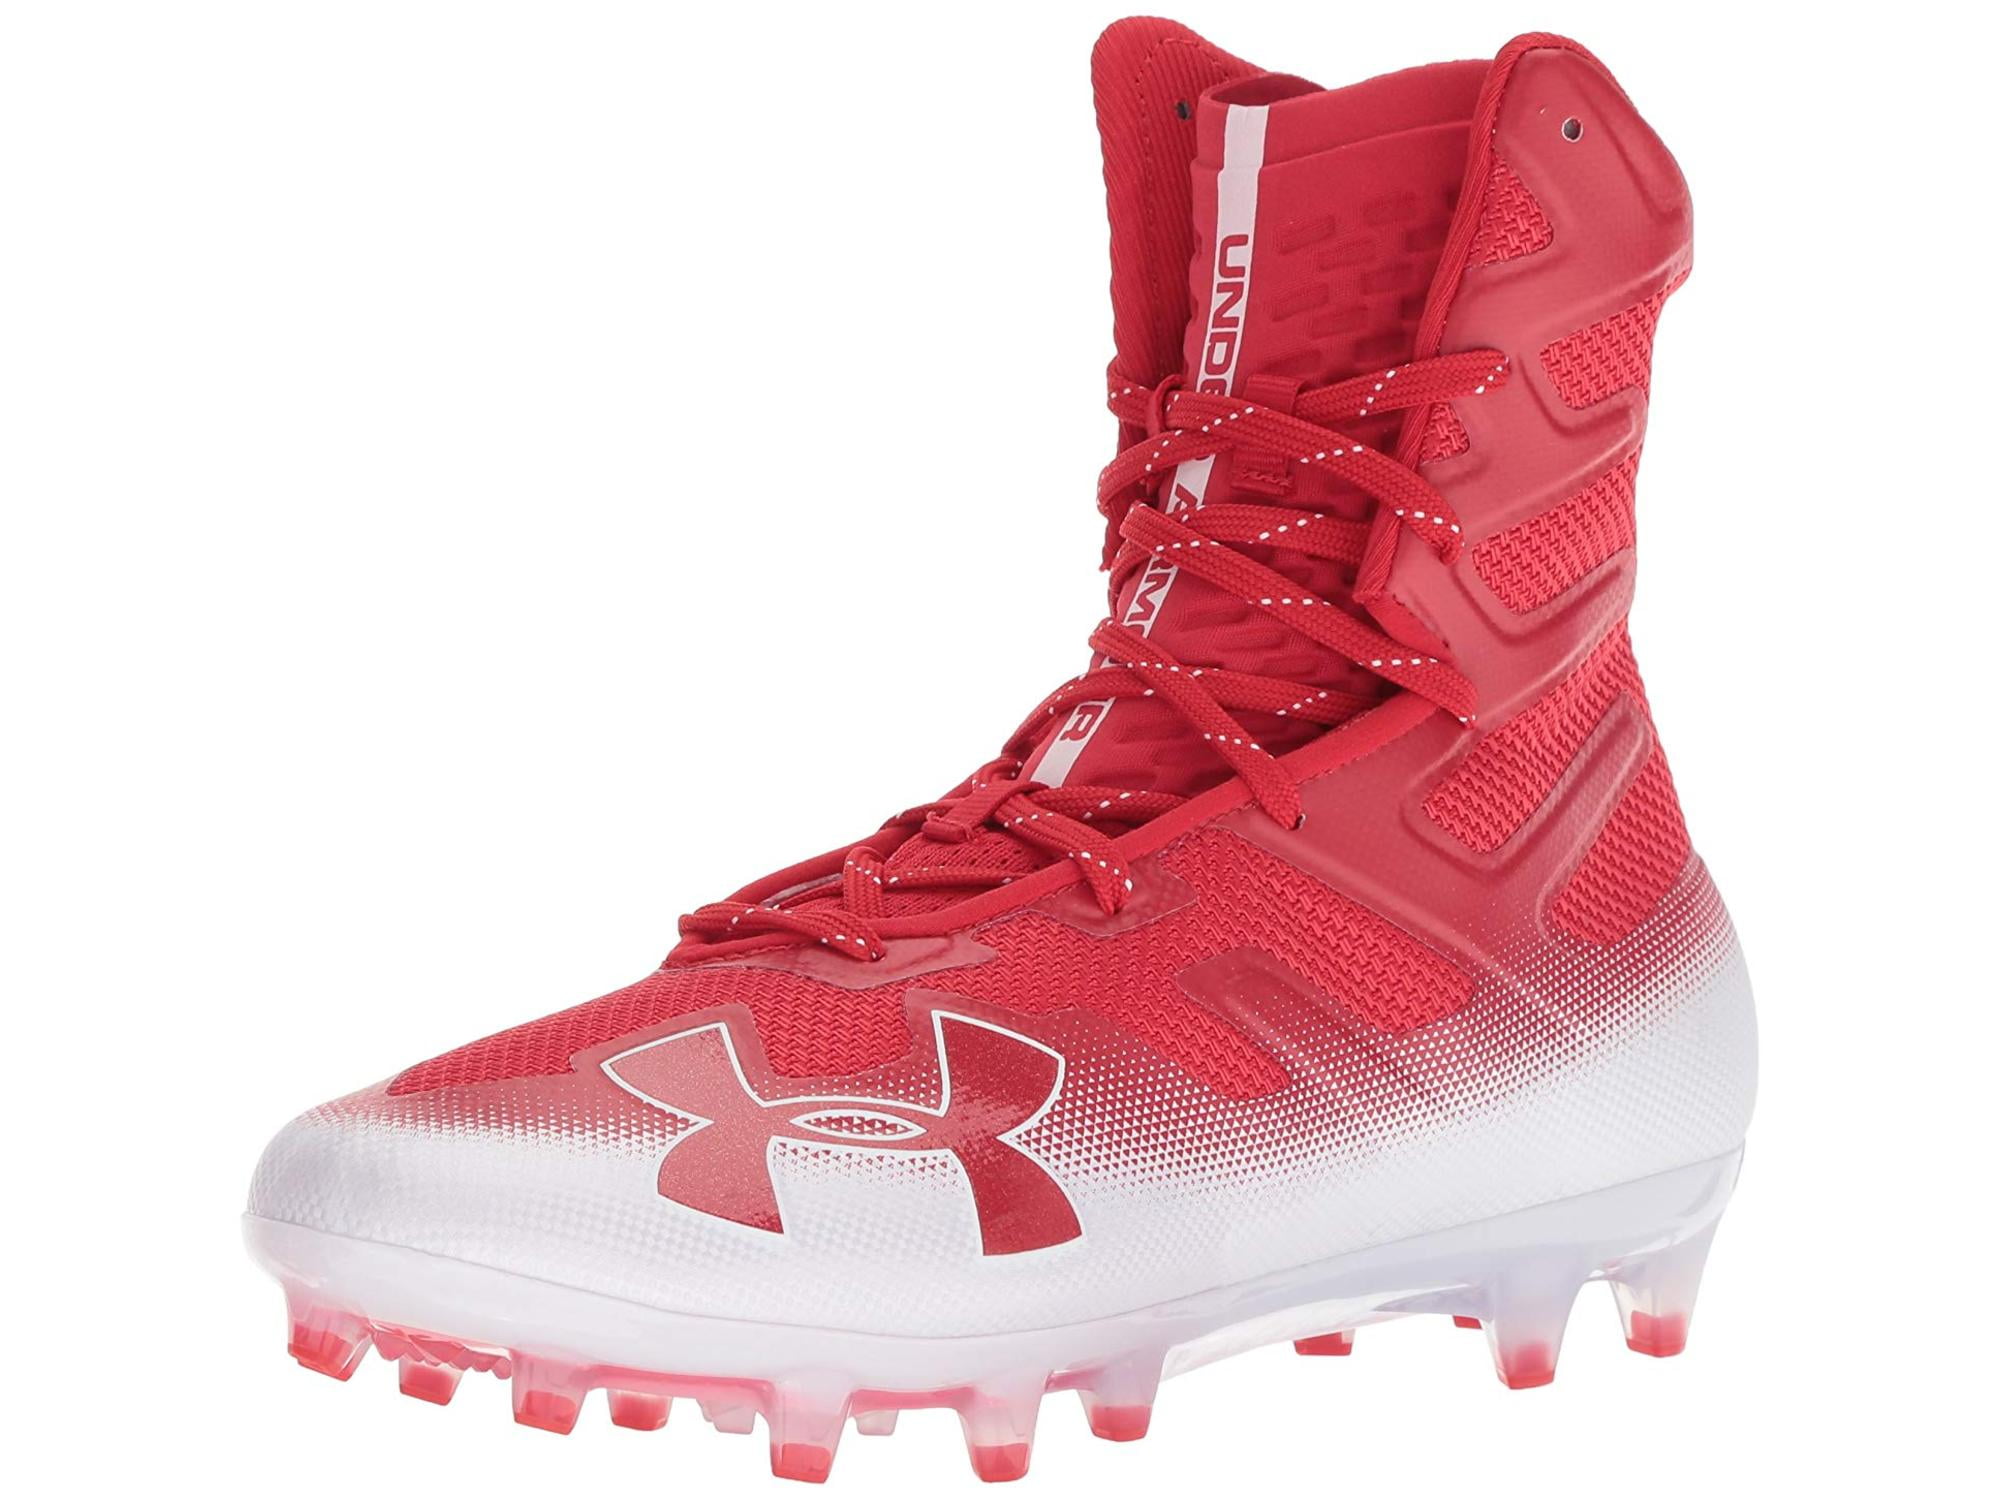 Under Armour Highlight Mid Football Cleats Red White 3000177 Men’s Size 10.5 